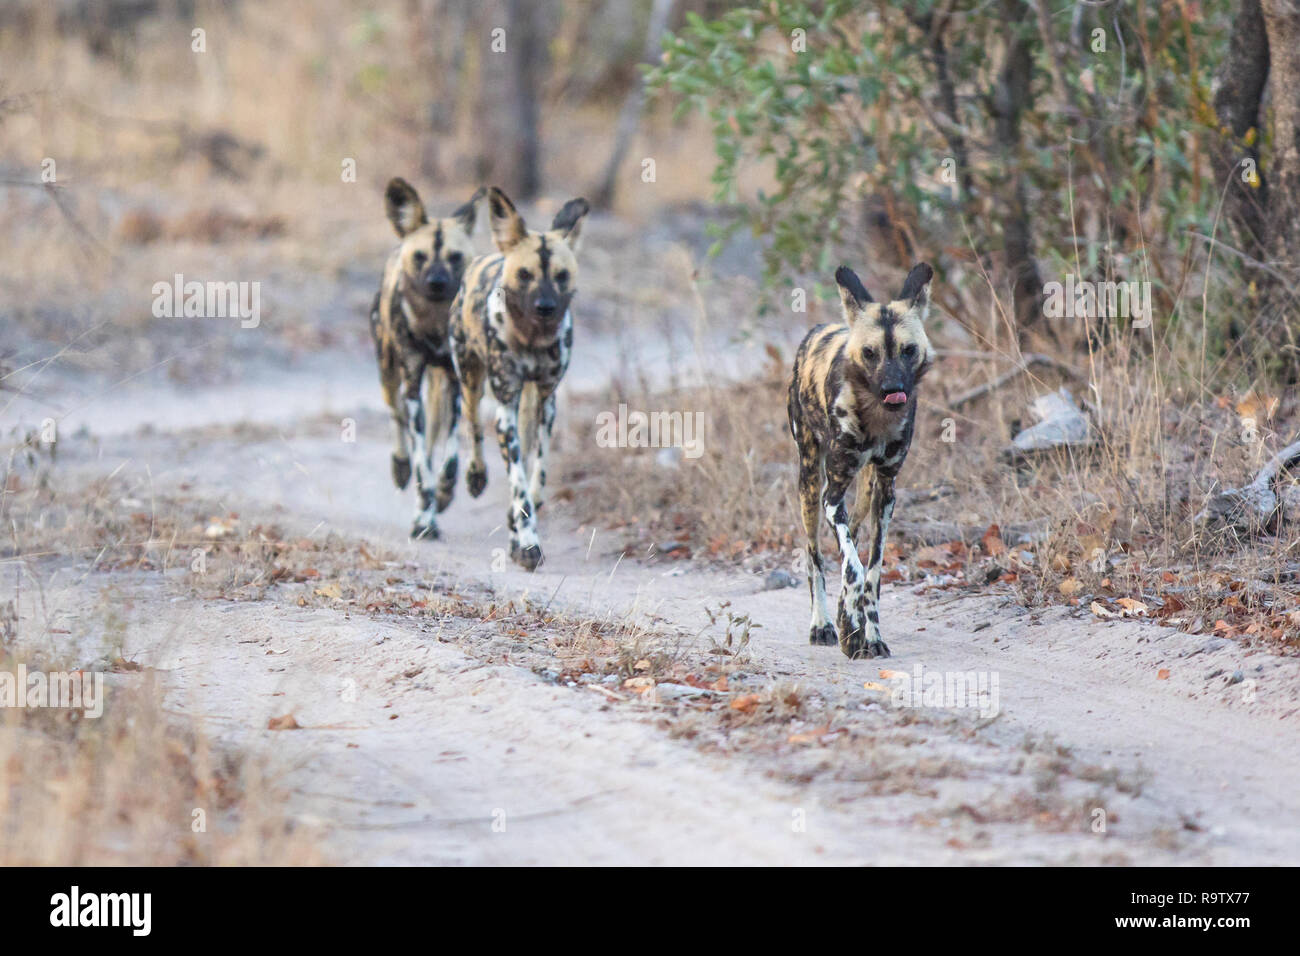 Pack of wild dogs hunting actively hunting early in the morning. Stock Photo